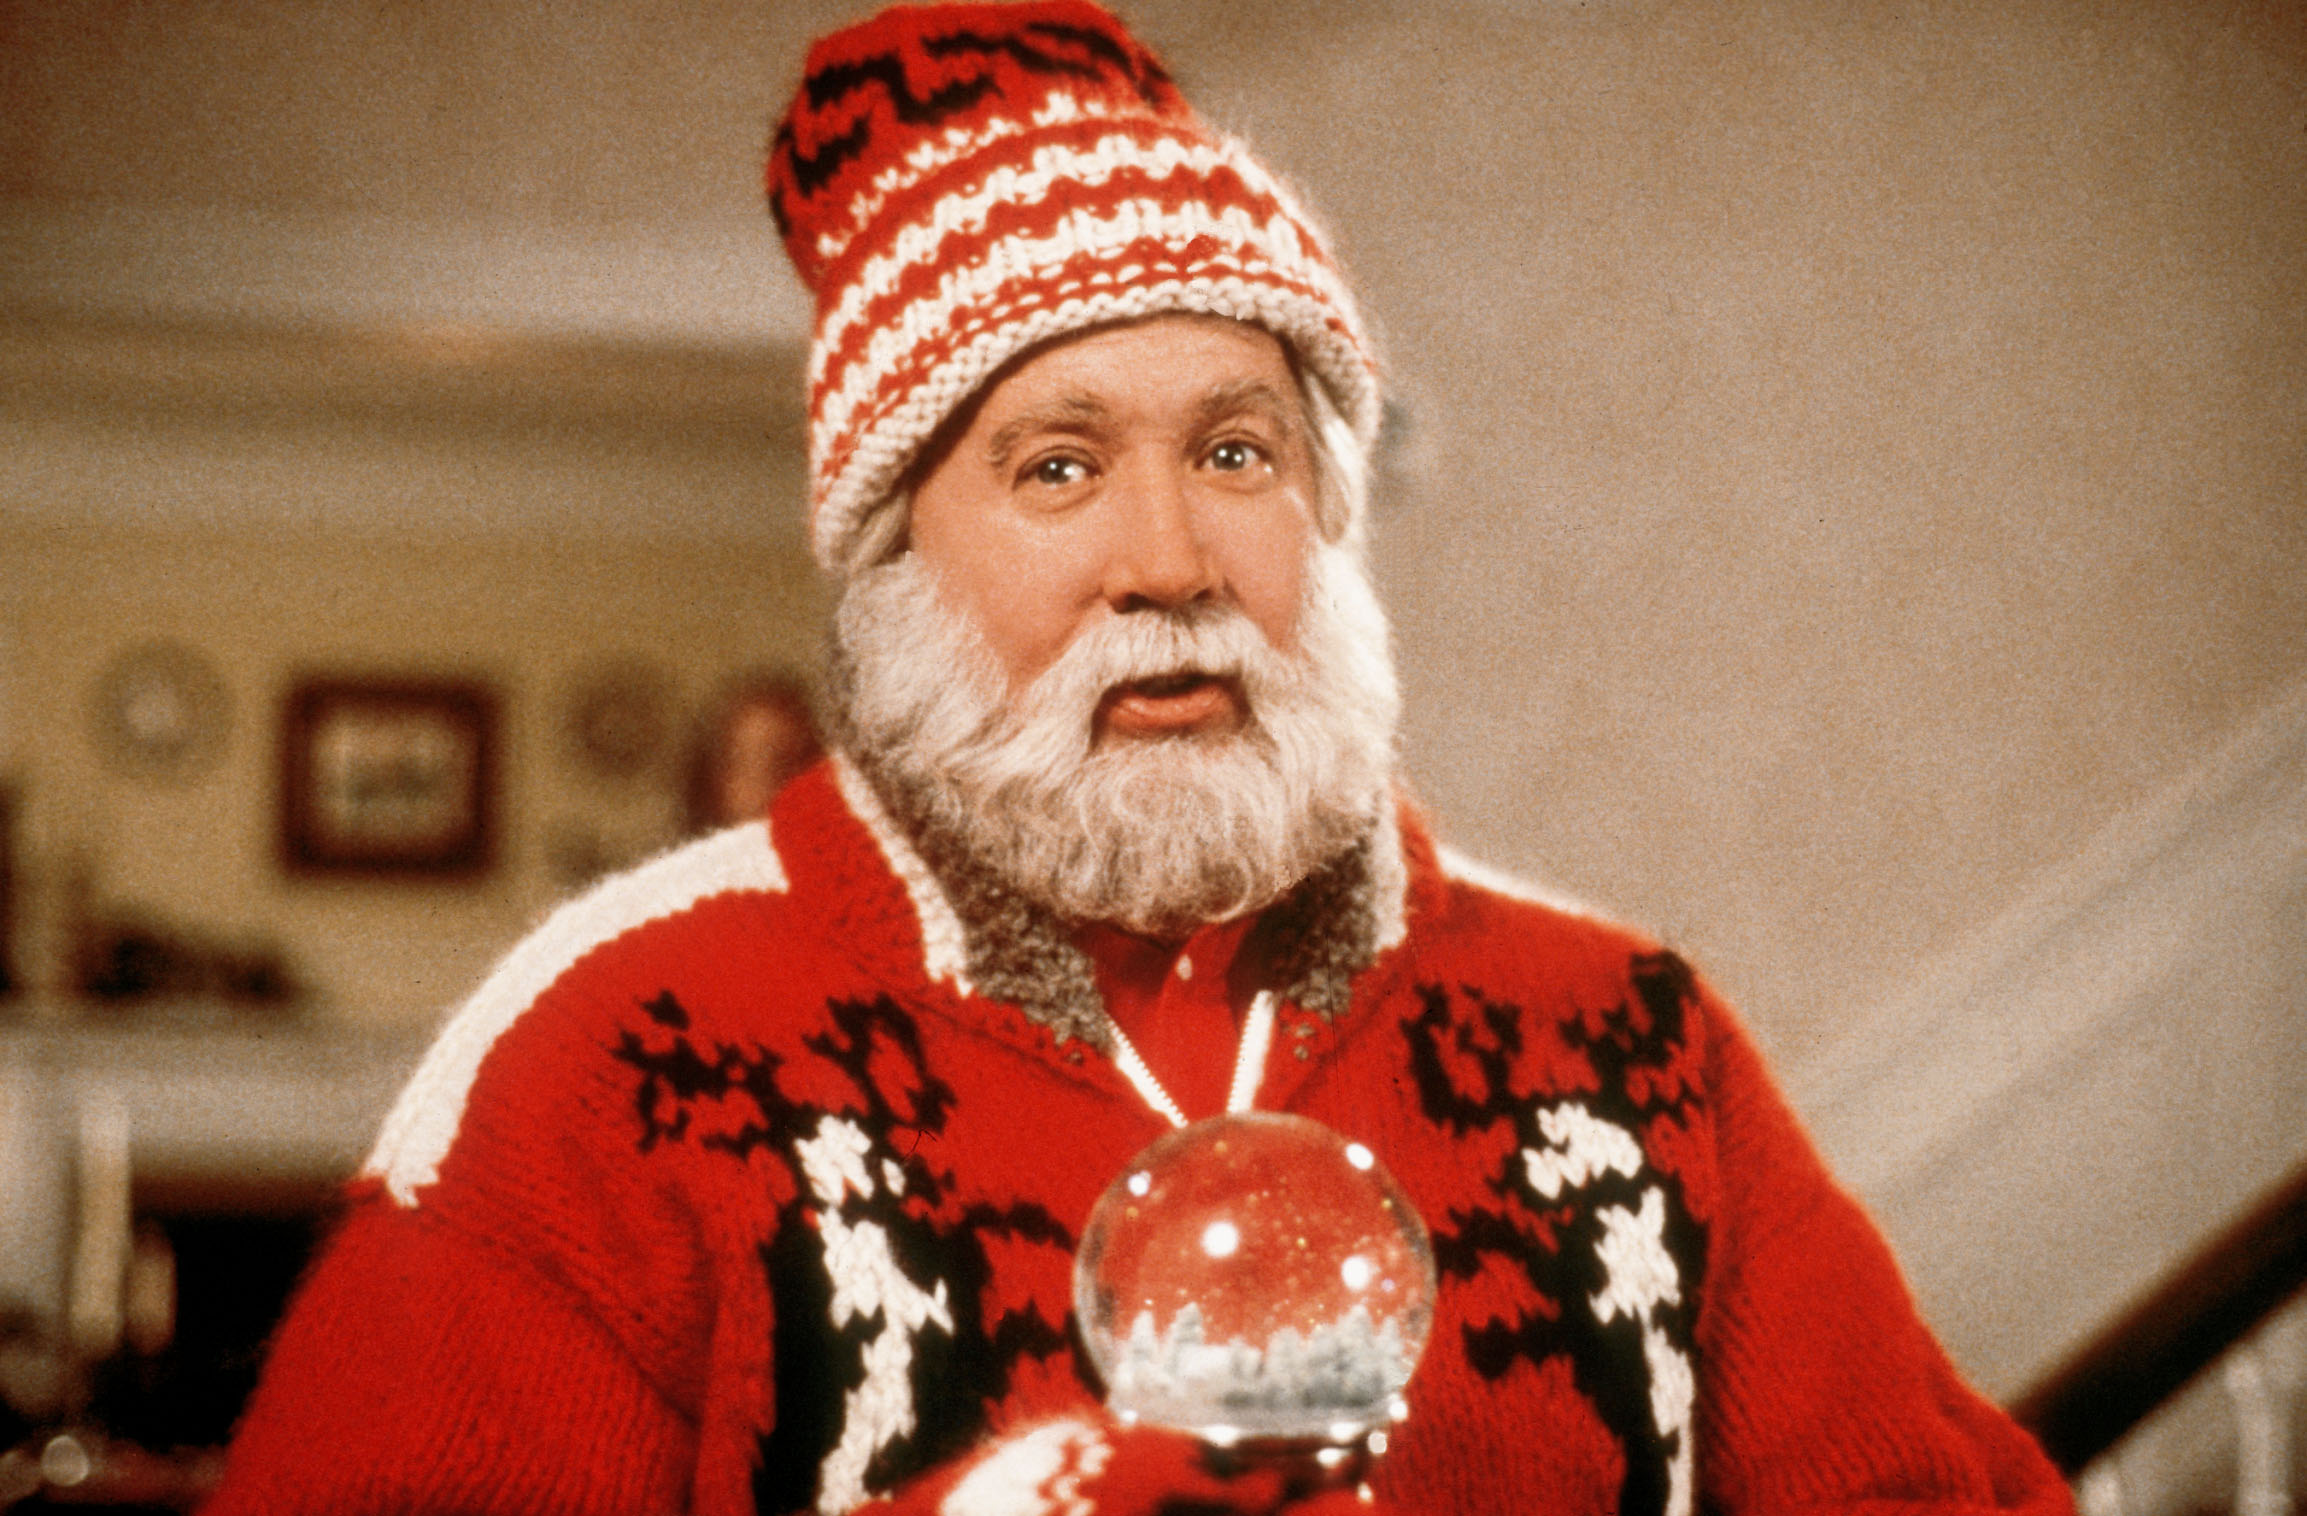 Tim Allen Image The Santa Clause HD Wallpaper And Background